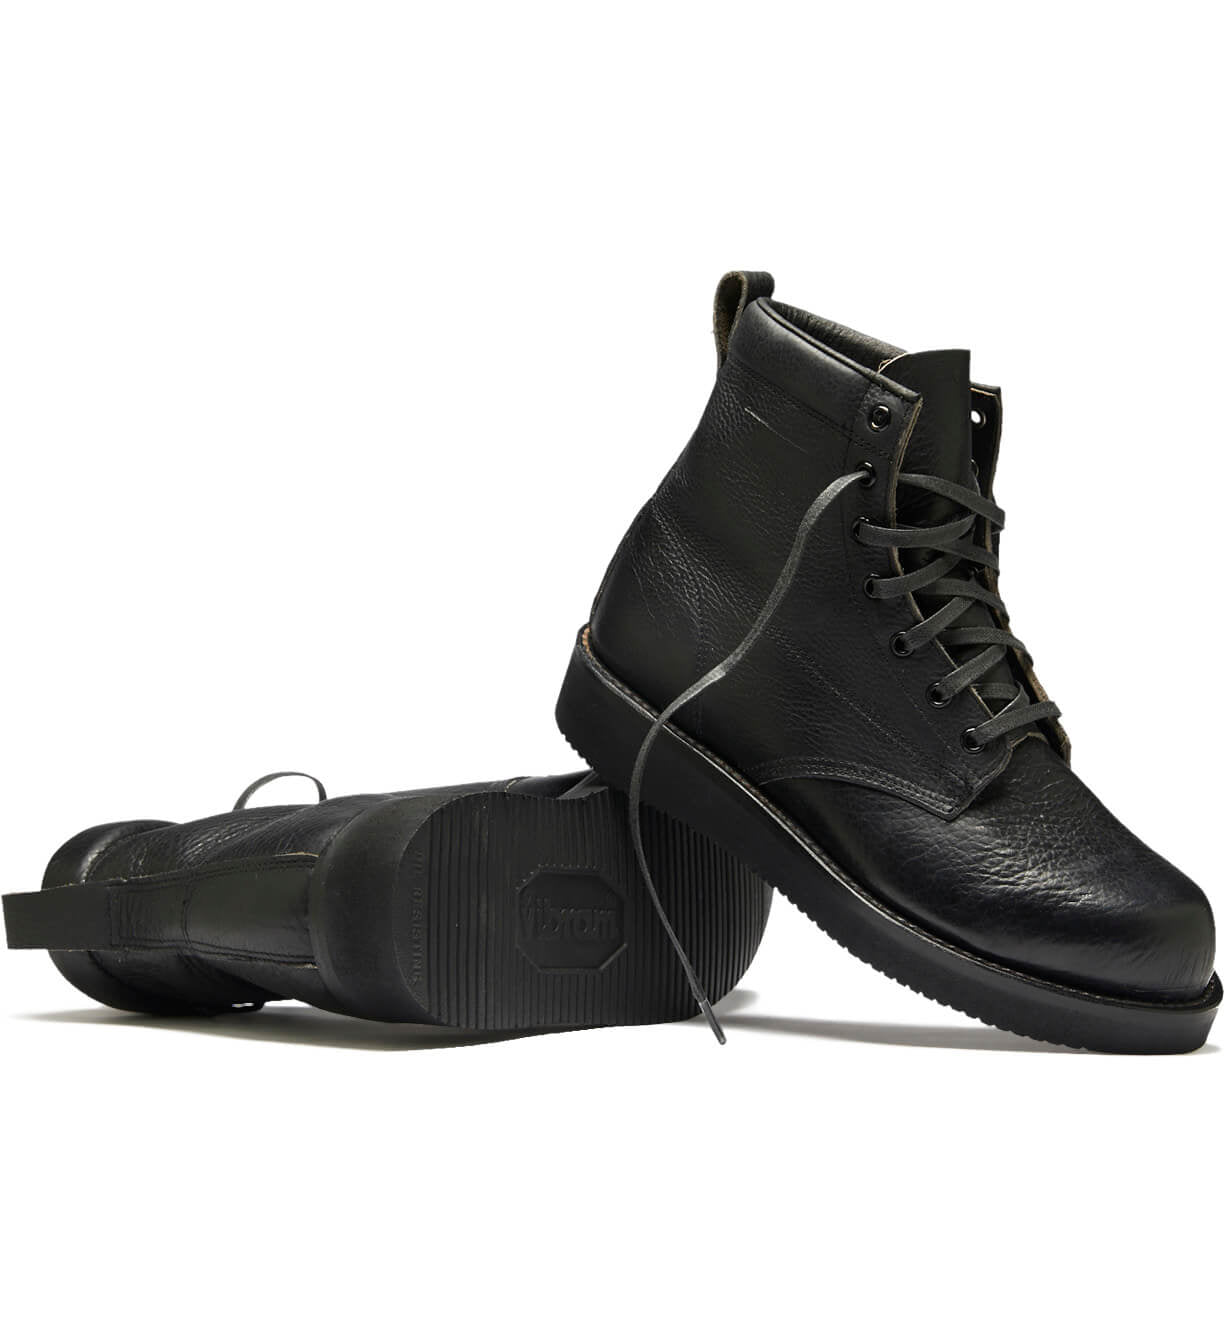 James boots from the Broken Homme collection, showcased on a clean white background.